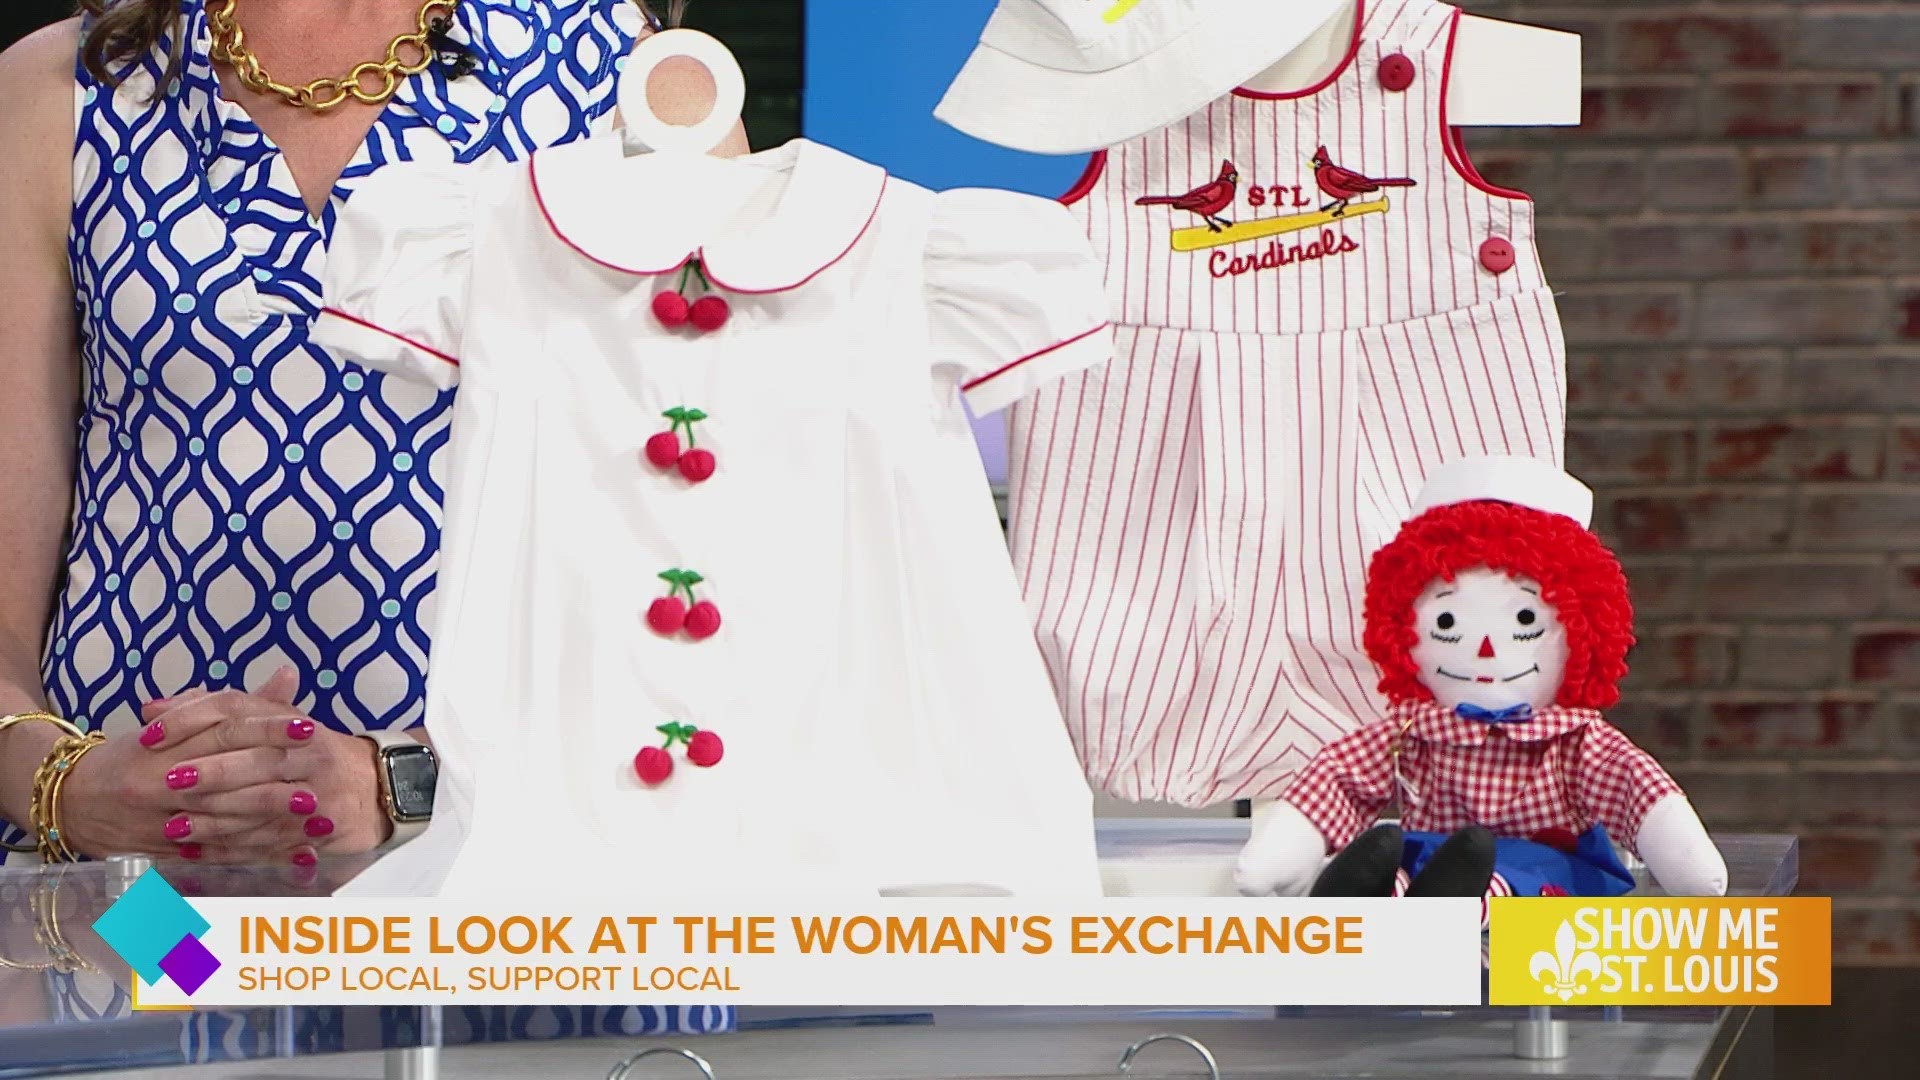 The Woman’s Exchange was founded to provide a marketplace for women to earn a livelihood through the sale of their handmade goods and heirloom quality garments.